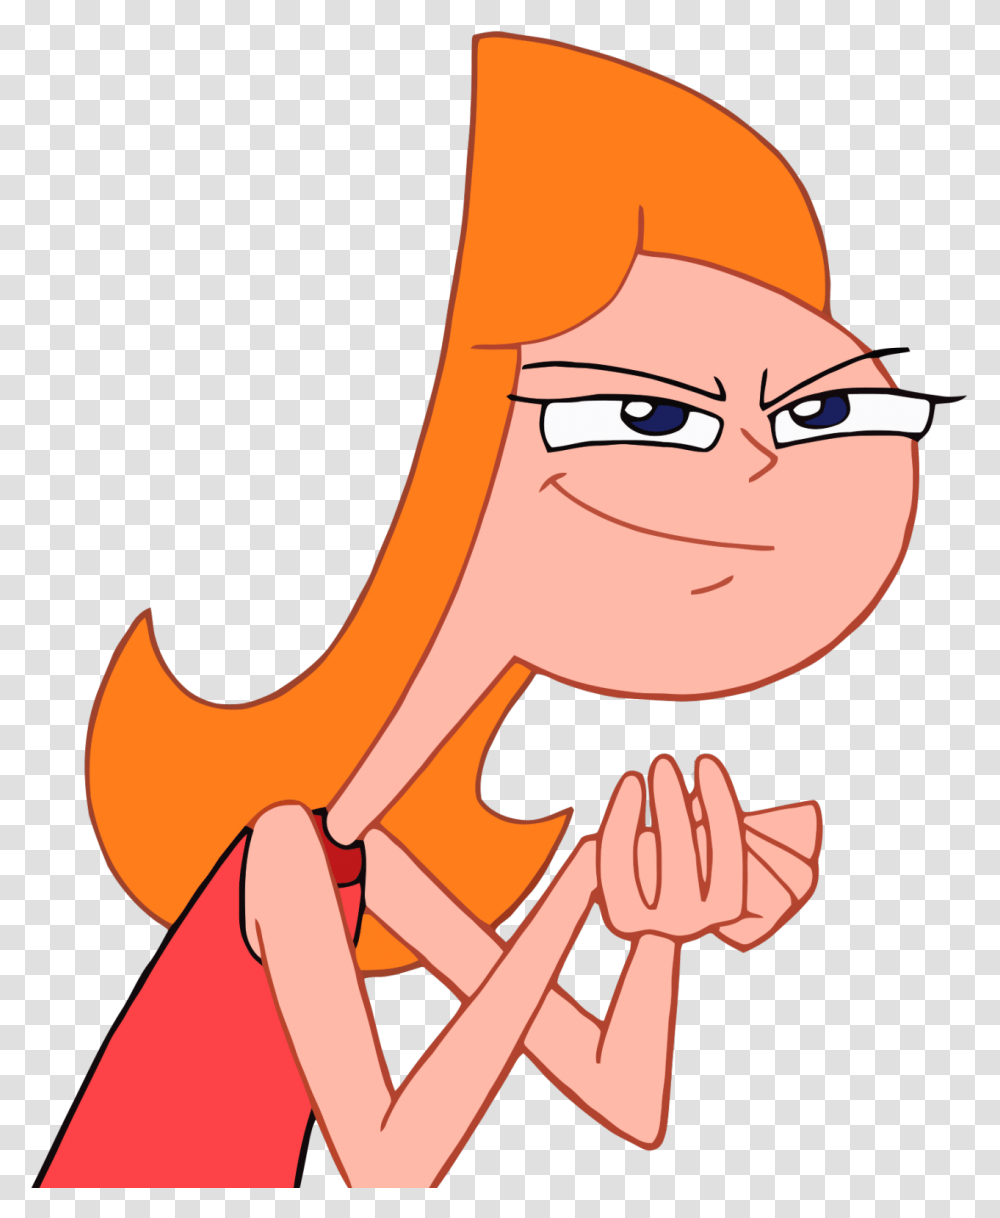 Candace Flynn Phineas Flynn Perry The Platypus Ferb 2 Candace Phineas Y Ferb, Axe, Label, Female, Face Transparent Png